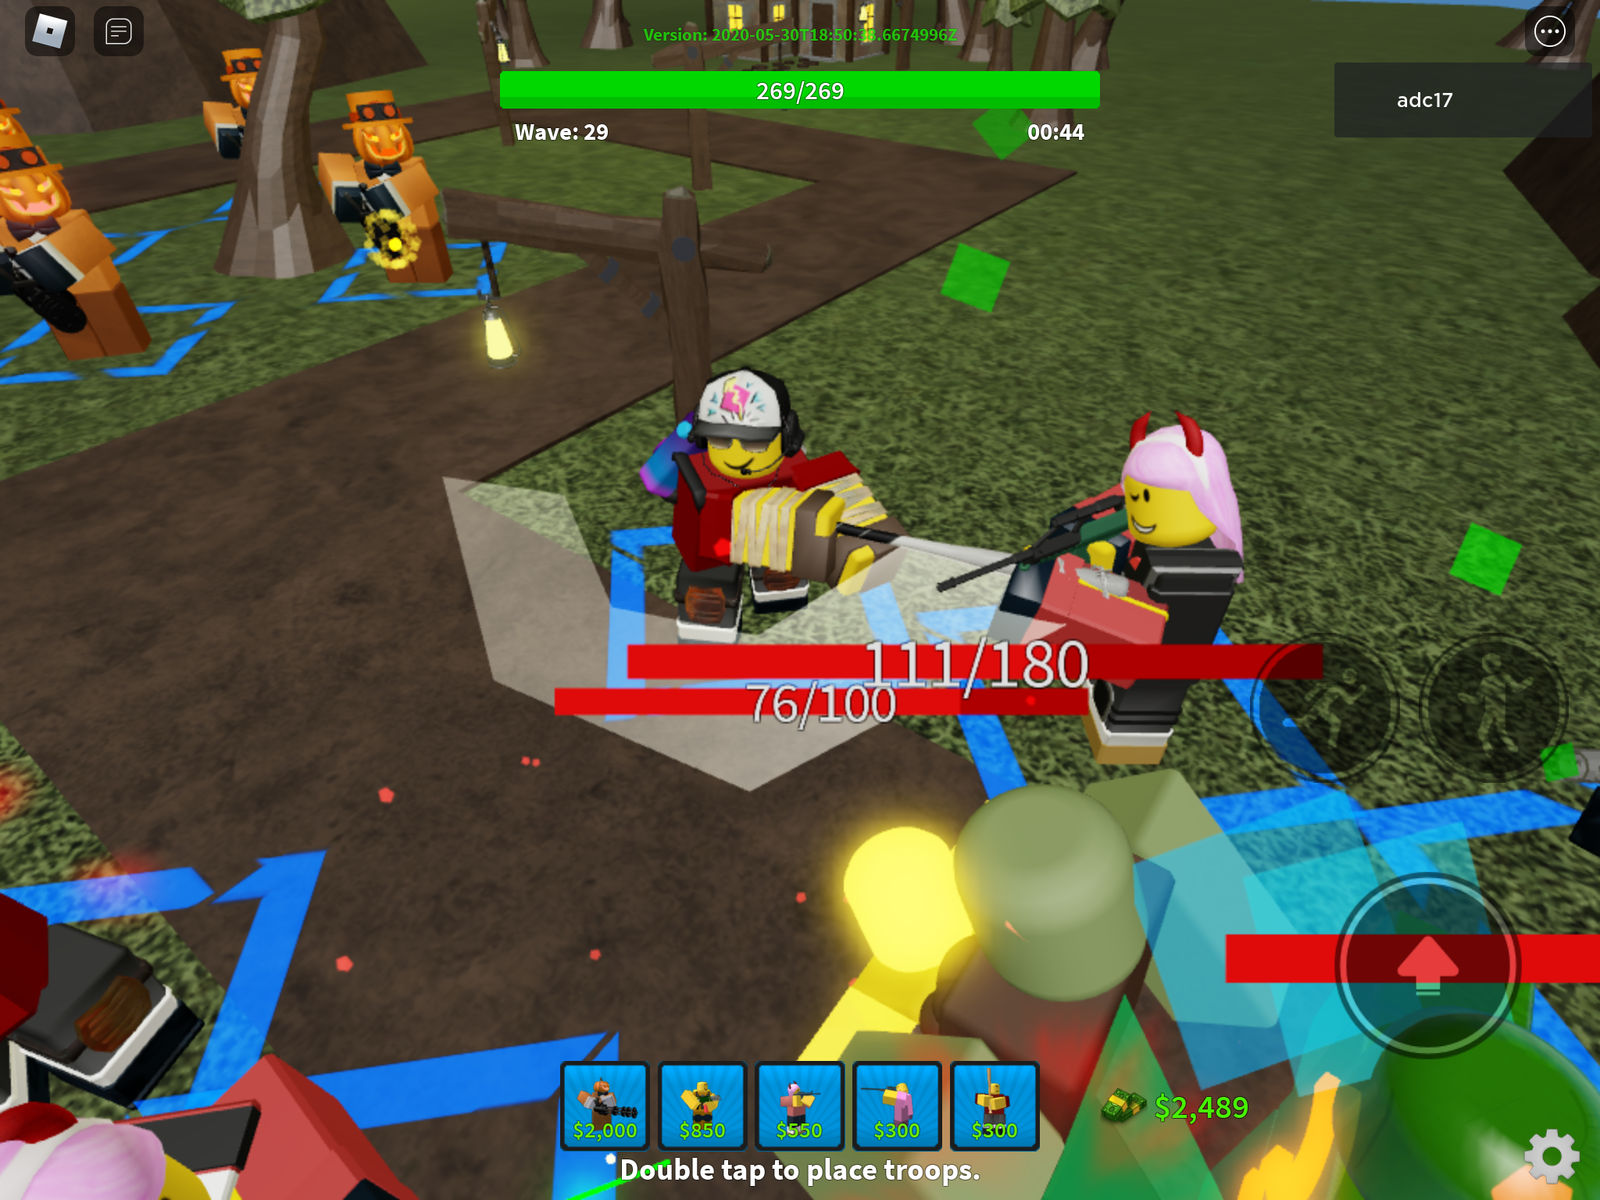 Tds Scout Gladiator Skin And Zero Two By Spaulding2013 On Deviantart - roblox tower defense simulator gladiator skins